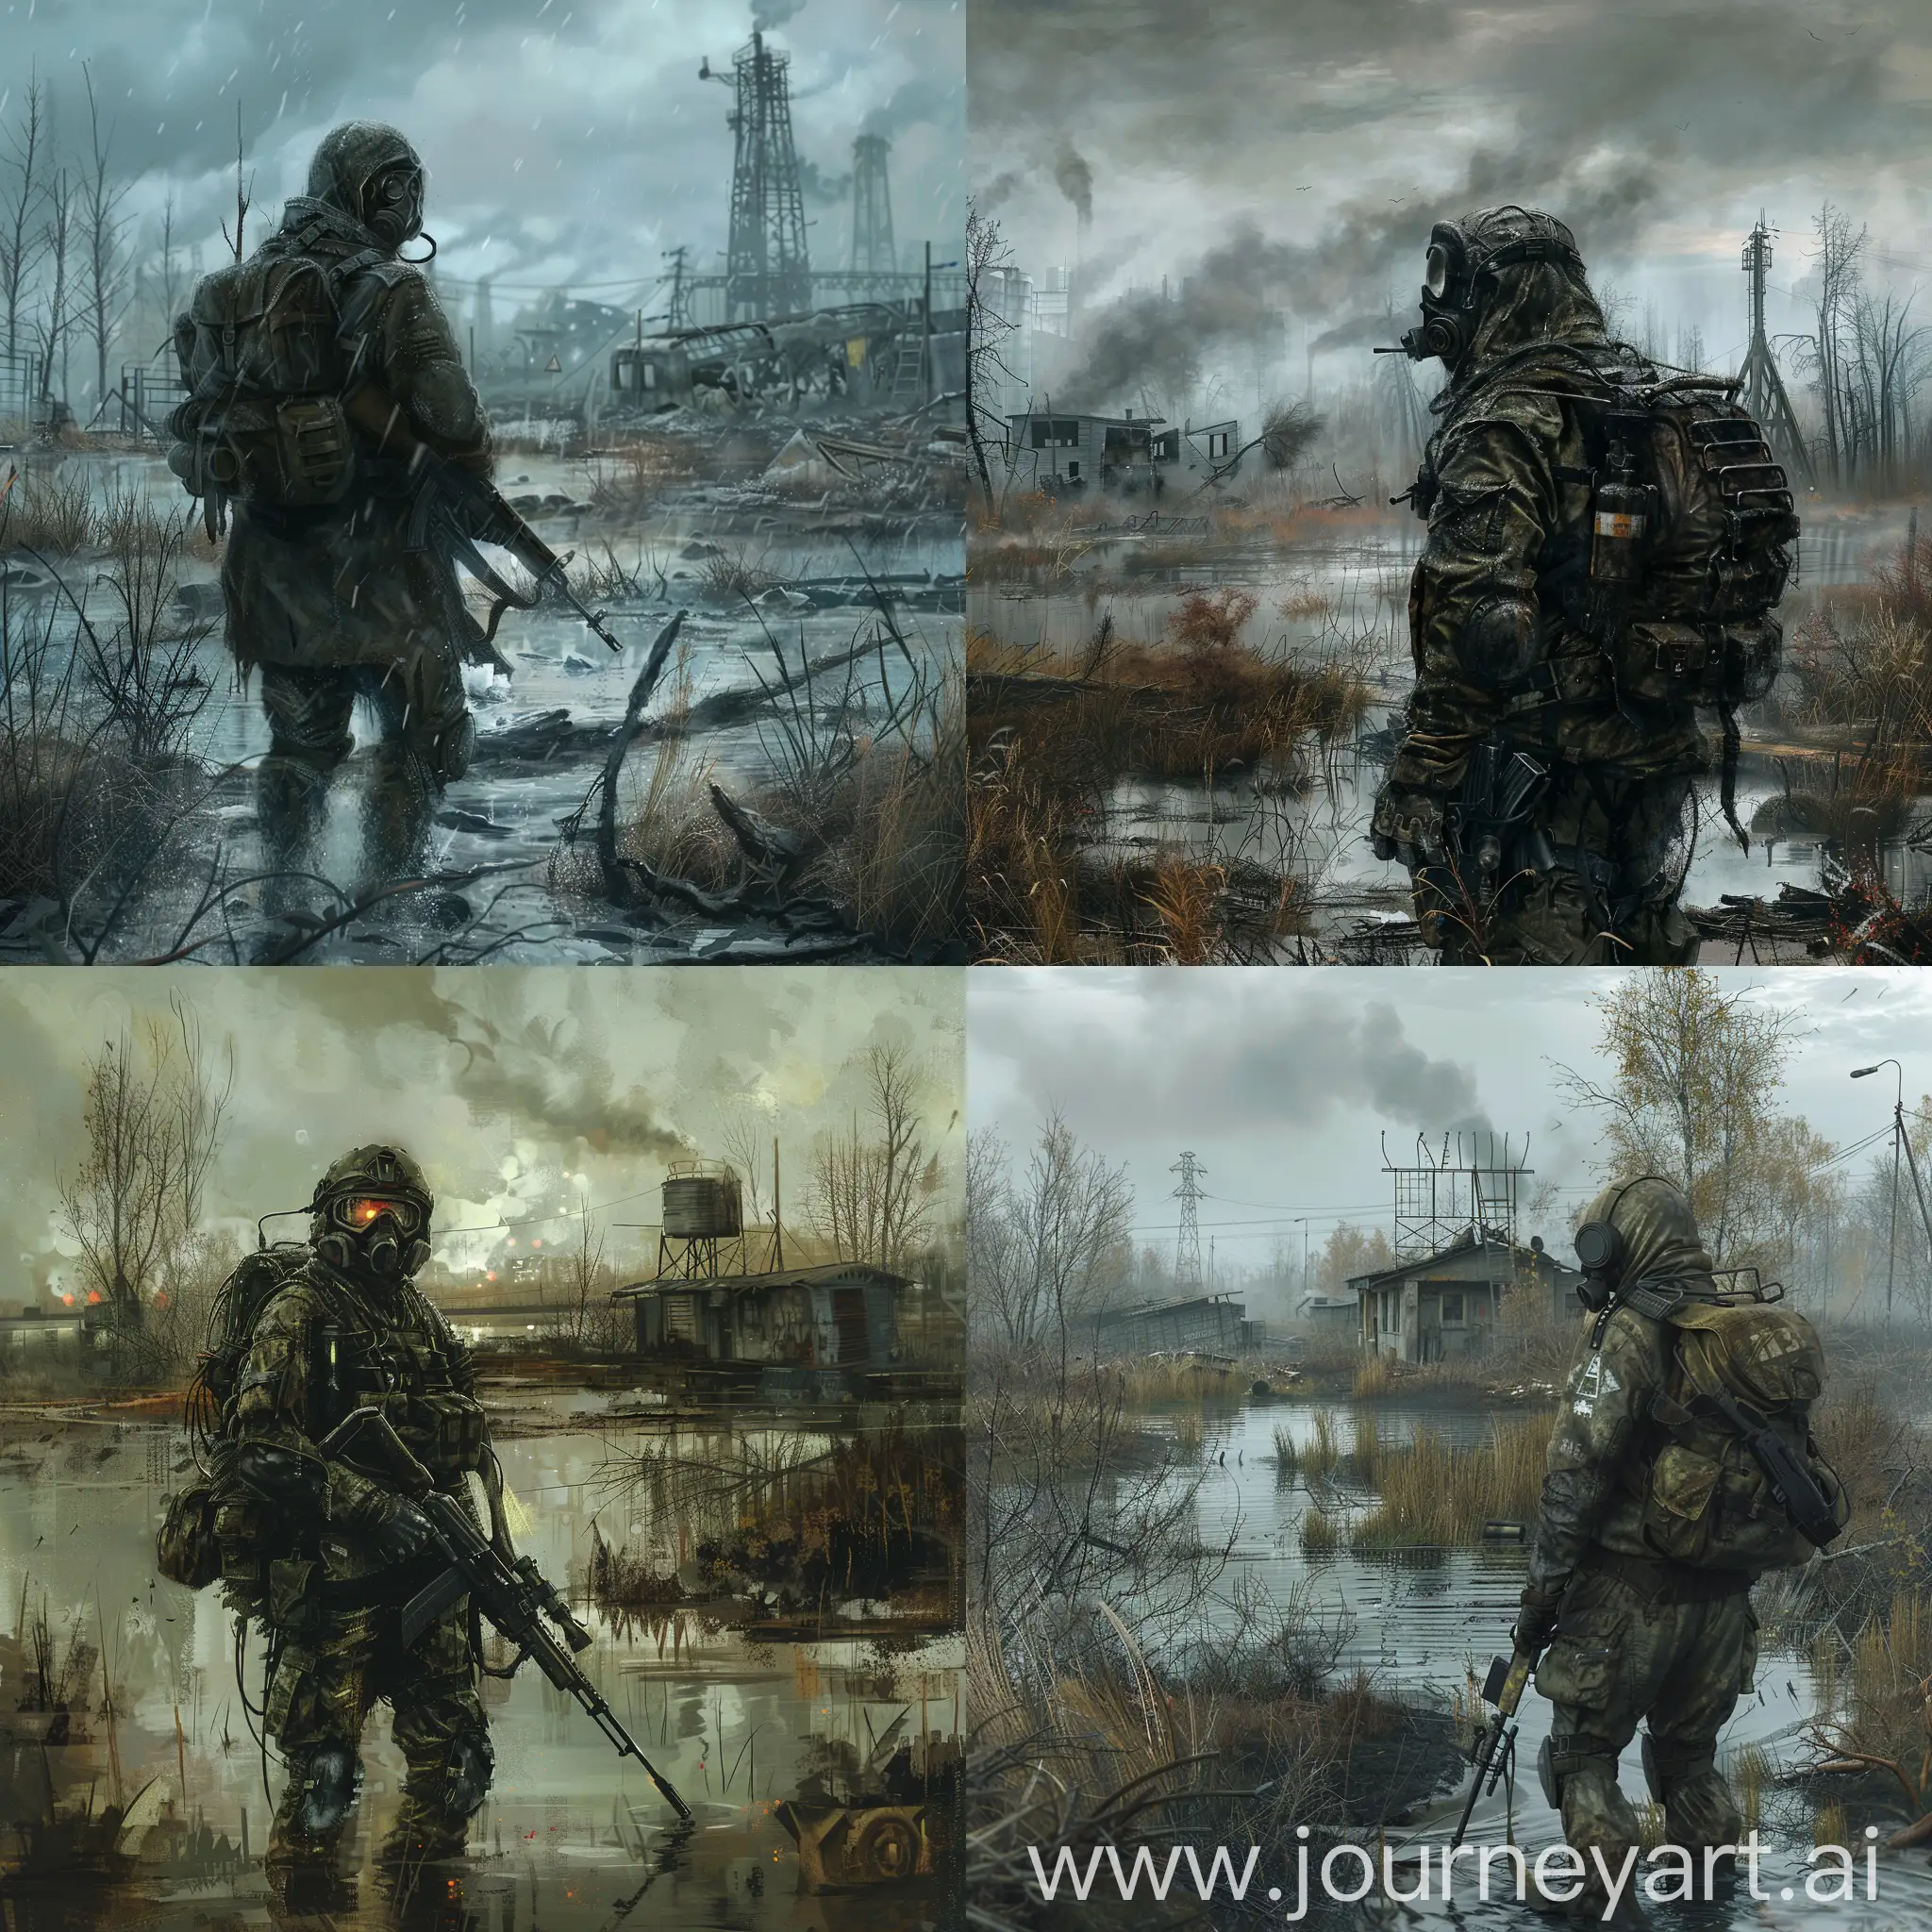 Stalker-in-Radioactive-Moscow-Swamp-with-Sniper-Rifle